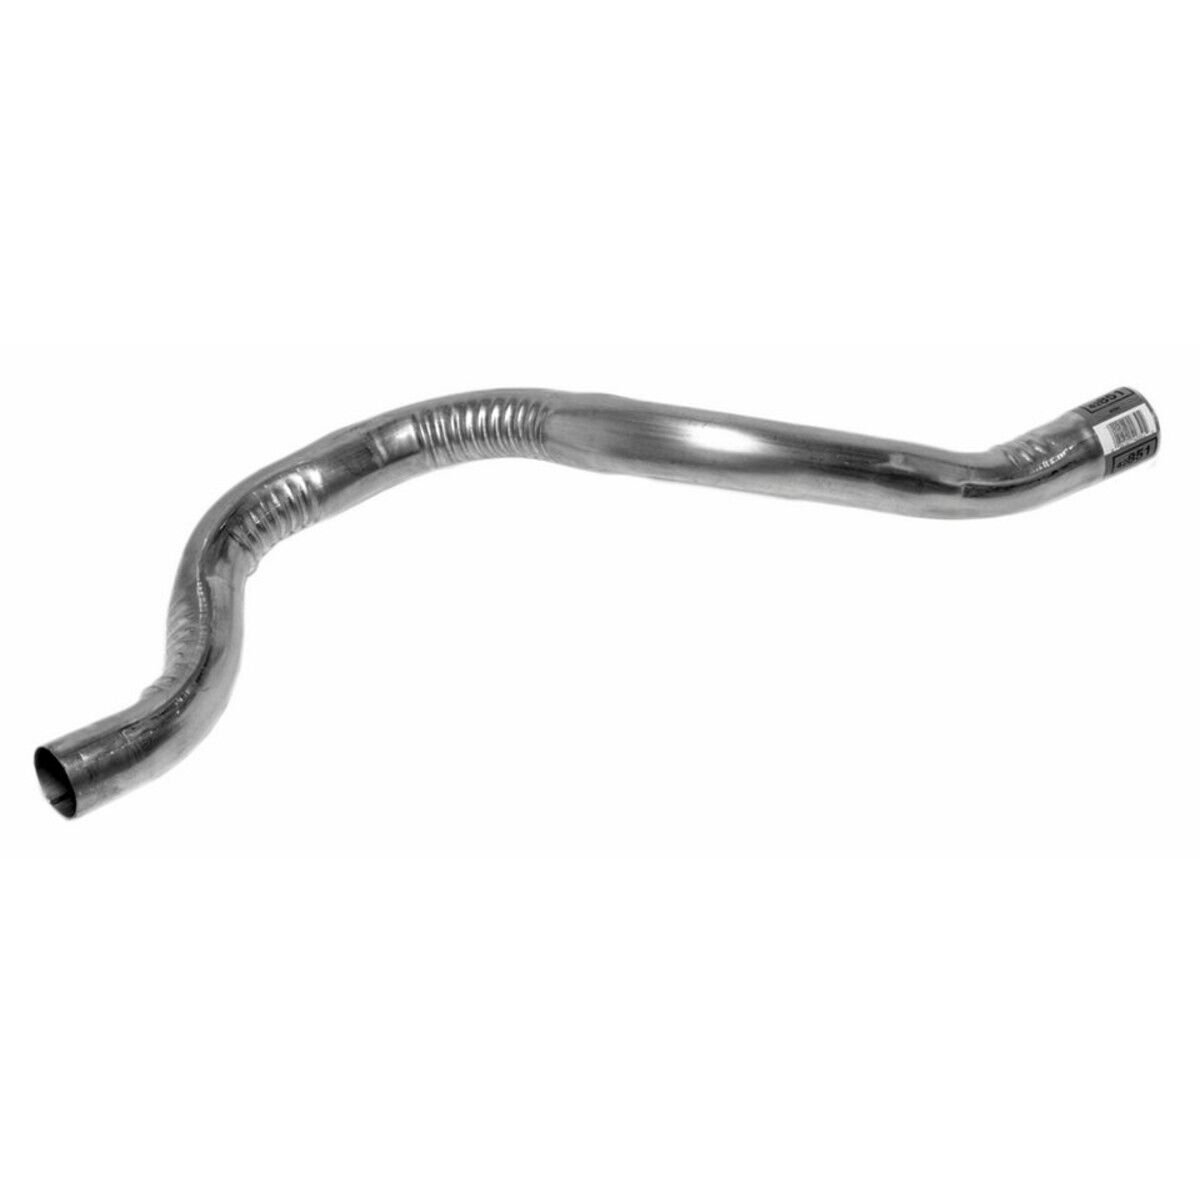 42851 Walker Exhaust Pipe for Chevy Olds Cutlass Pontiac Grand Prix Buick Regal